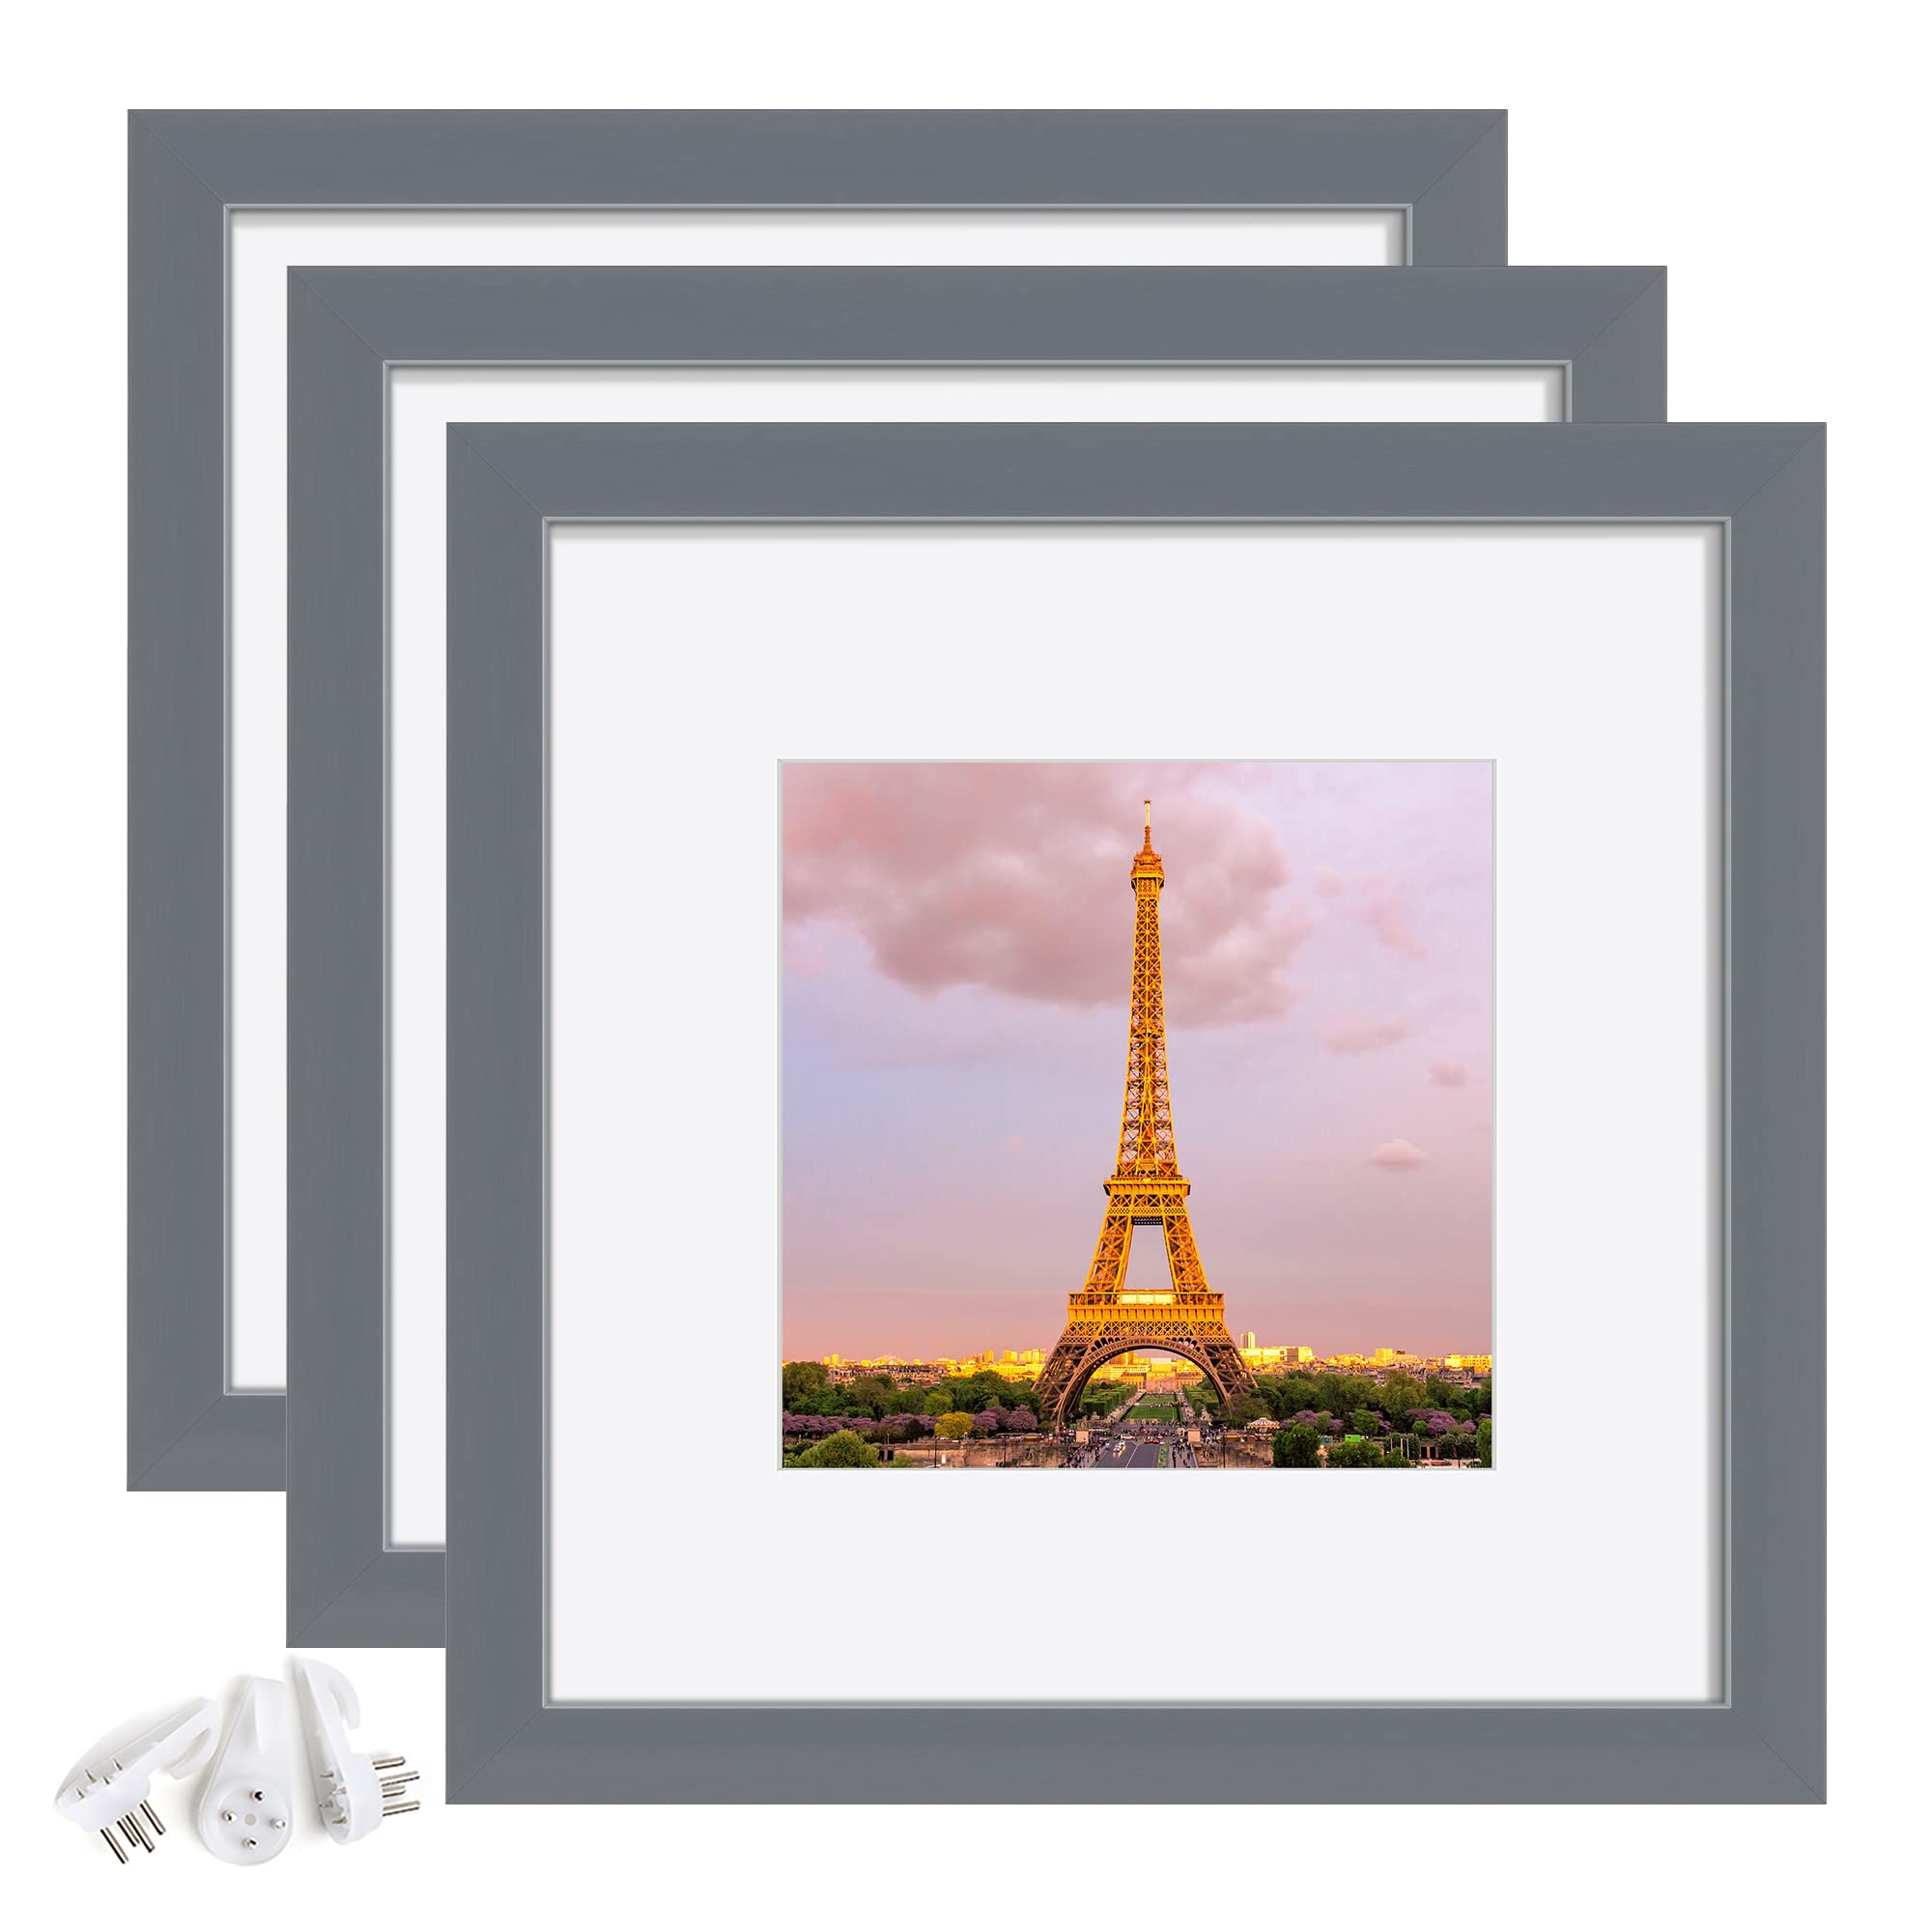 upsimples 6x6 Picture Frame Made of High Definition Glass, Display Pictures  4x4 with Mat or 6x6 Without Mat, Gallery Wall Frame Set, White Gold Black